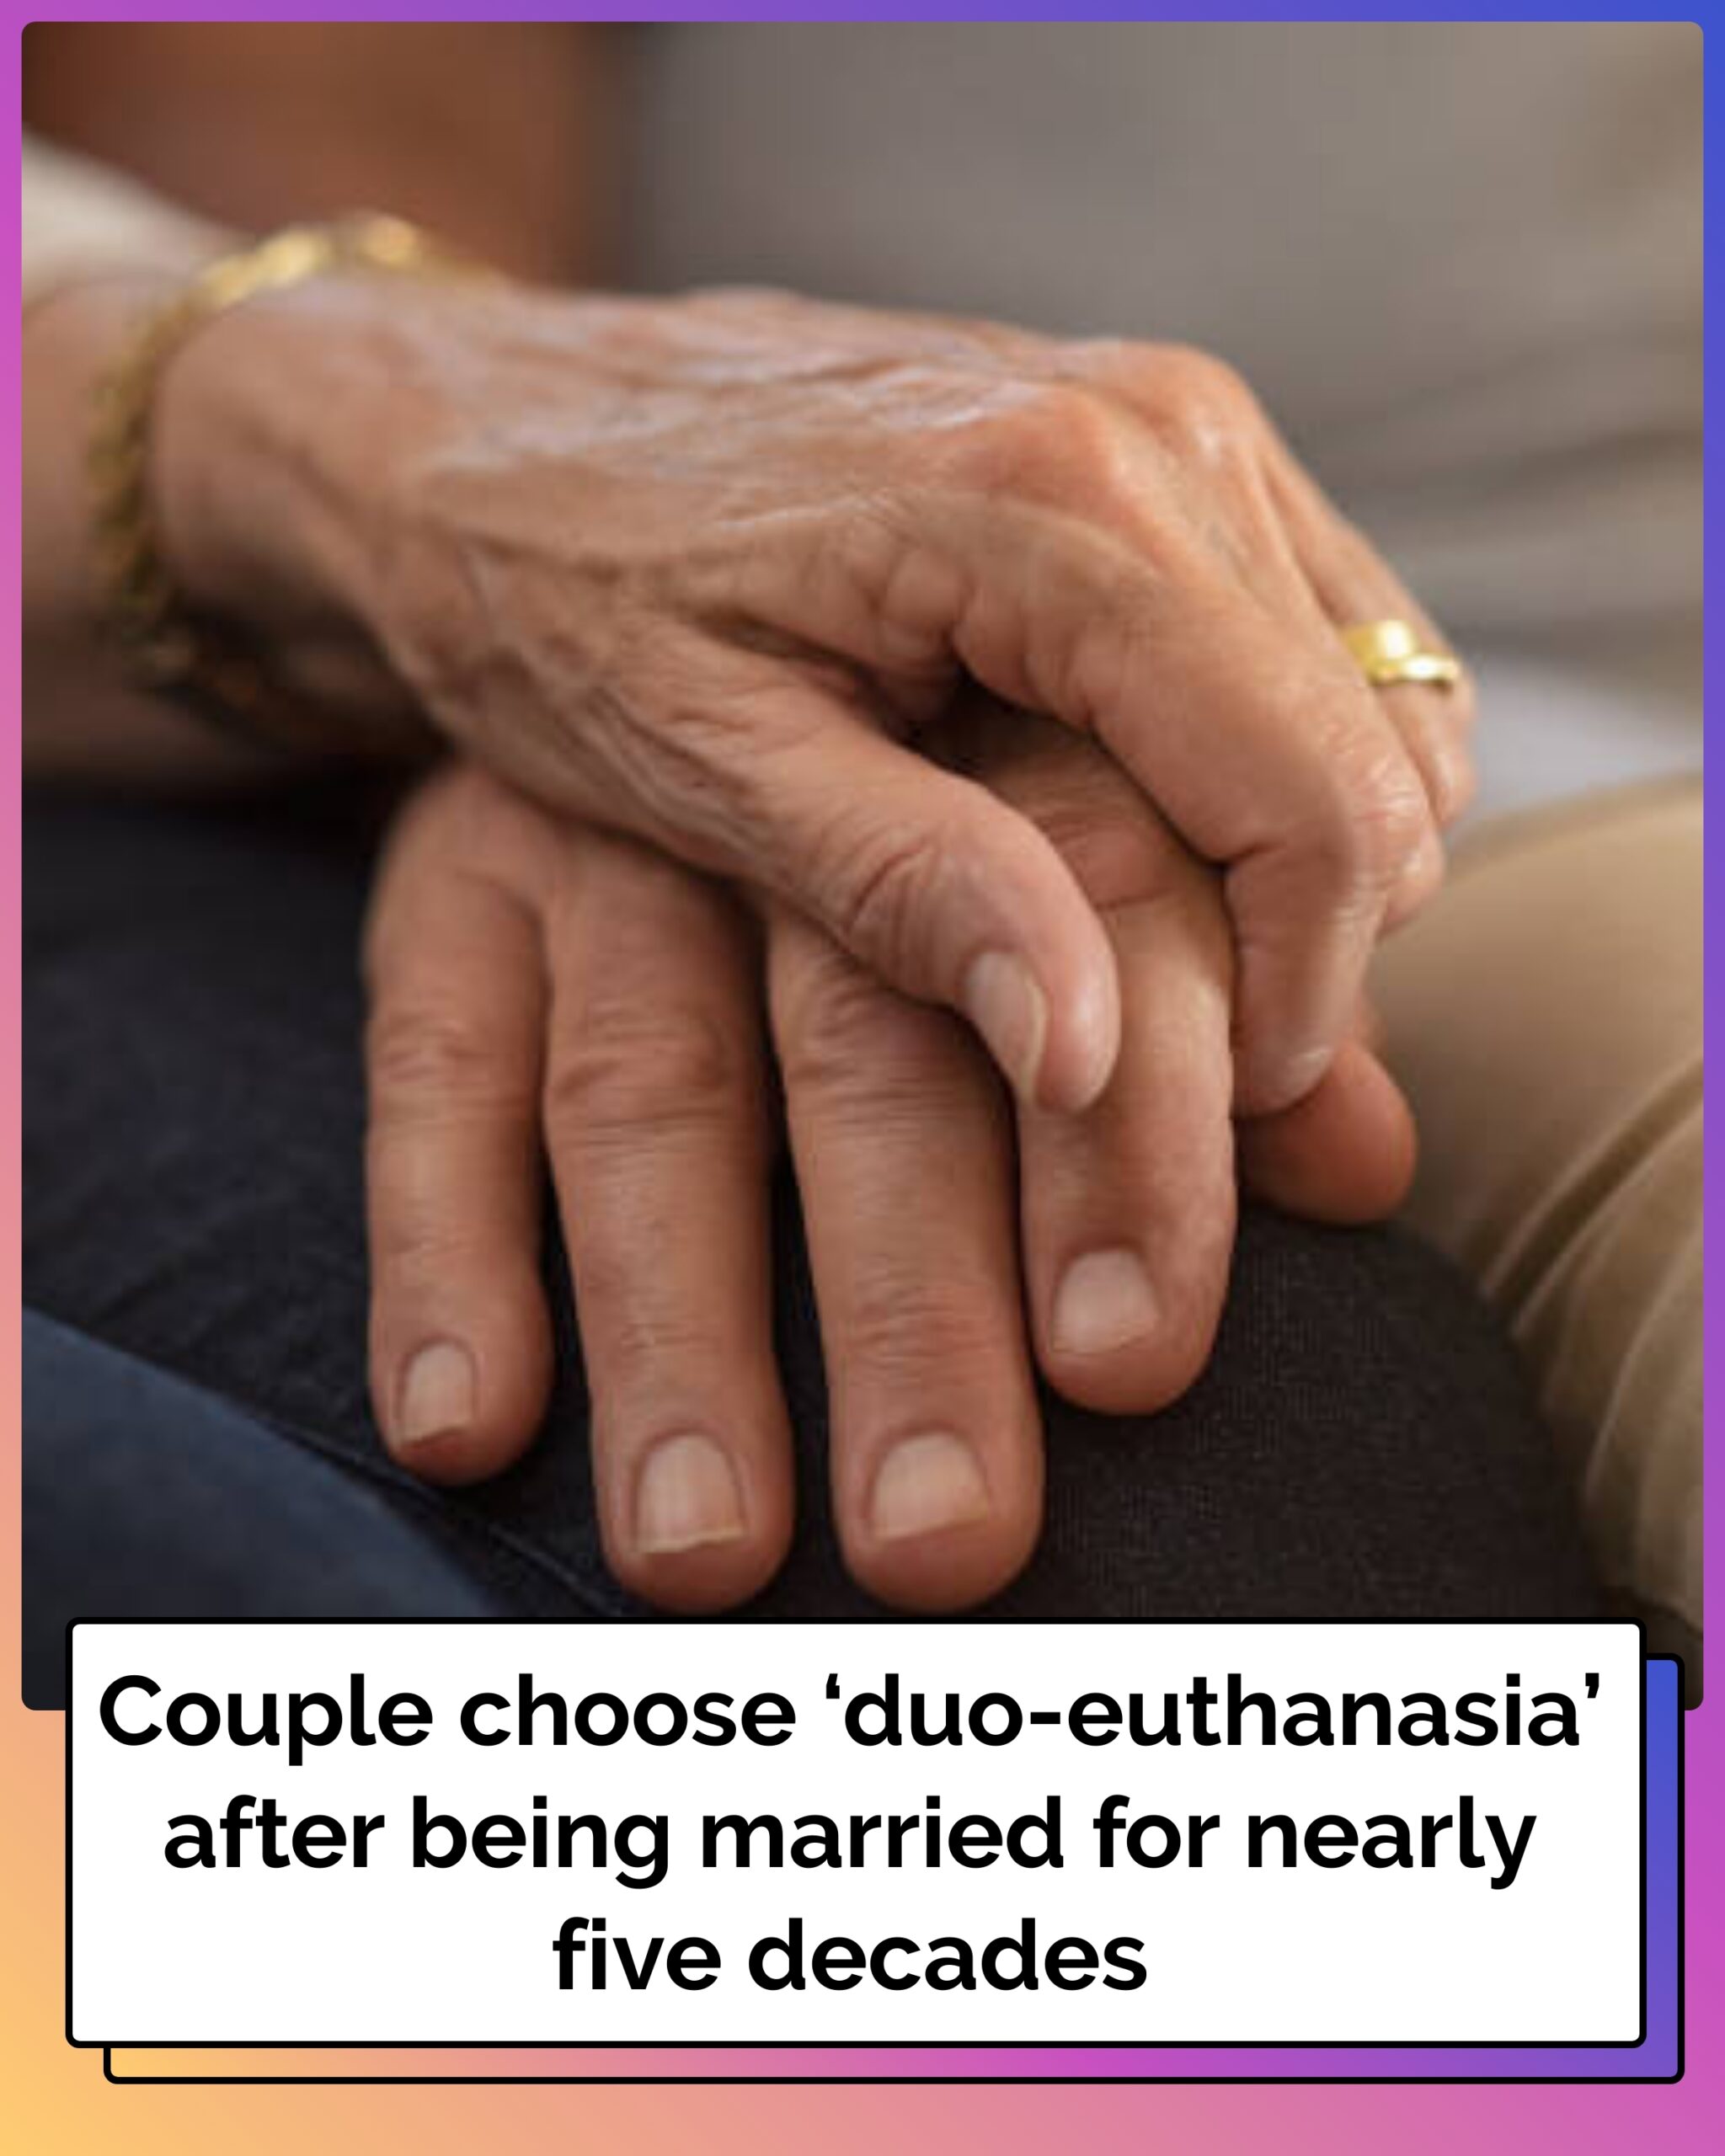 Couple Choose ‘Duo-Euthanasia’ After Being Married for Nearly Five Decades